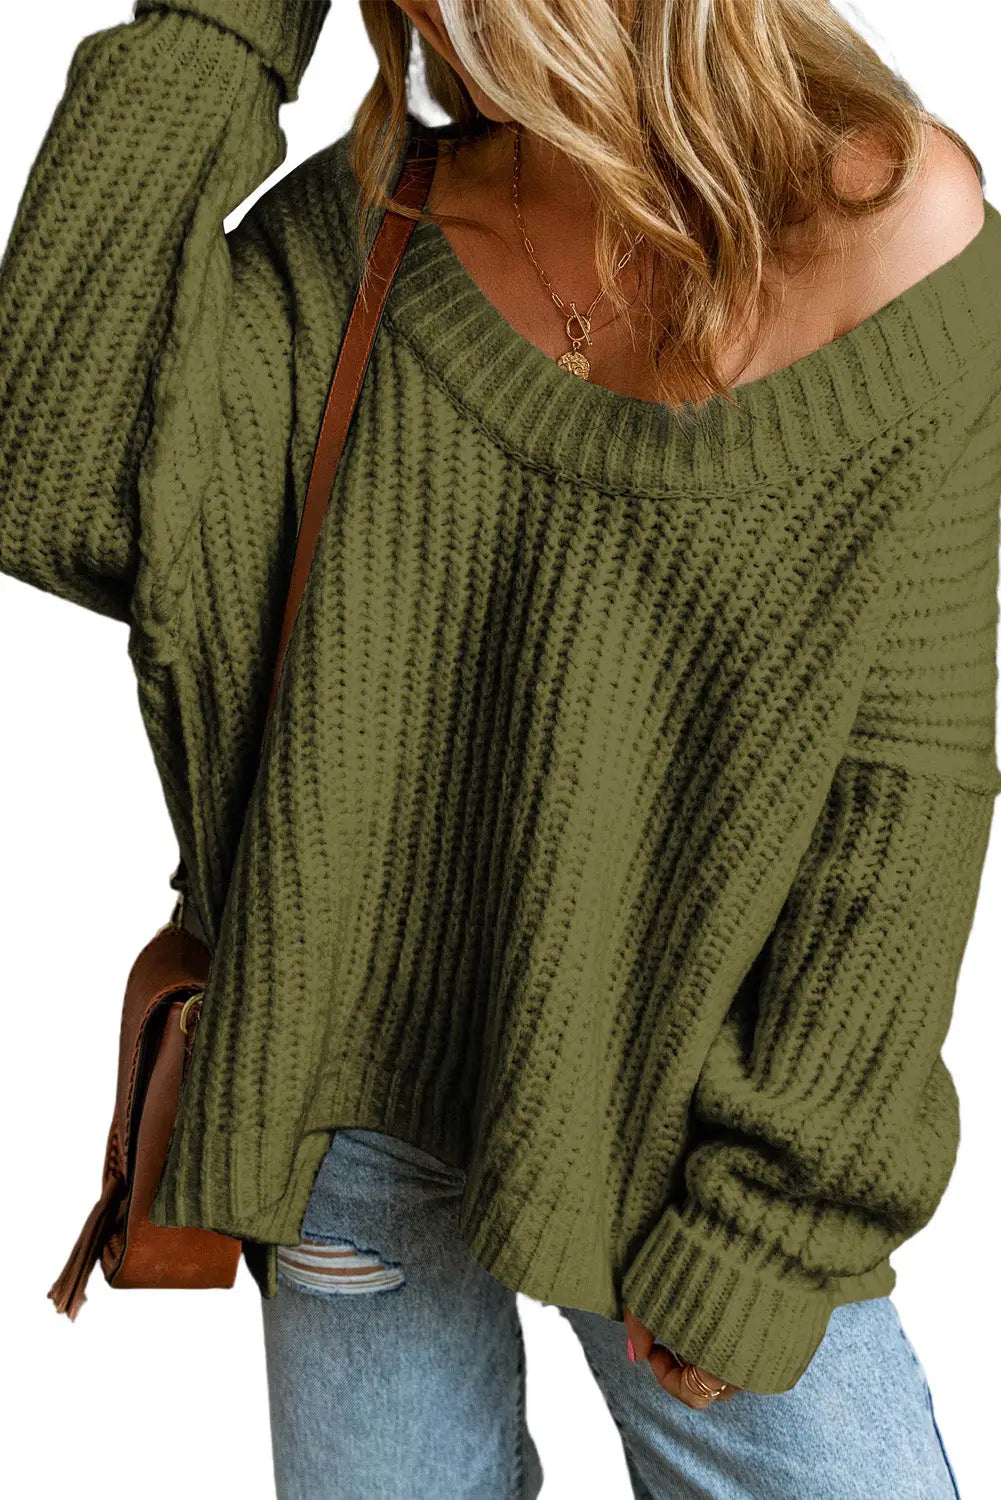 Pickle green ribbed knit round neck slouchy chunky sweater - sweaters & cardigans